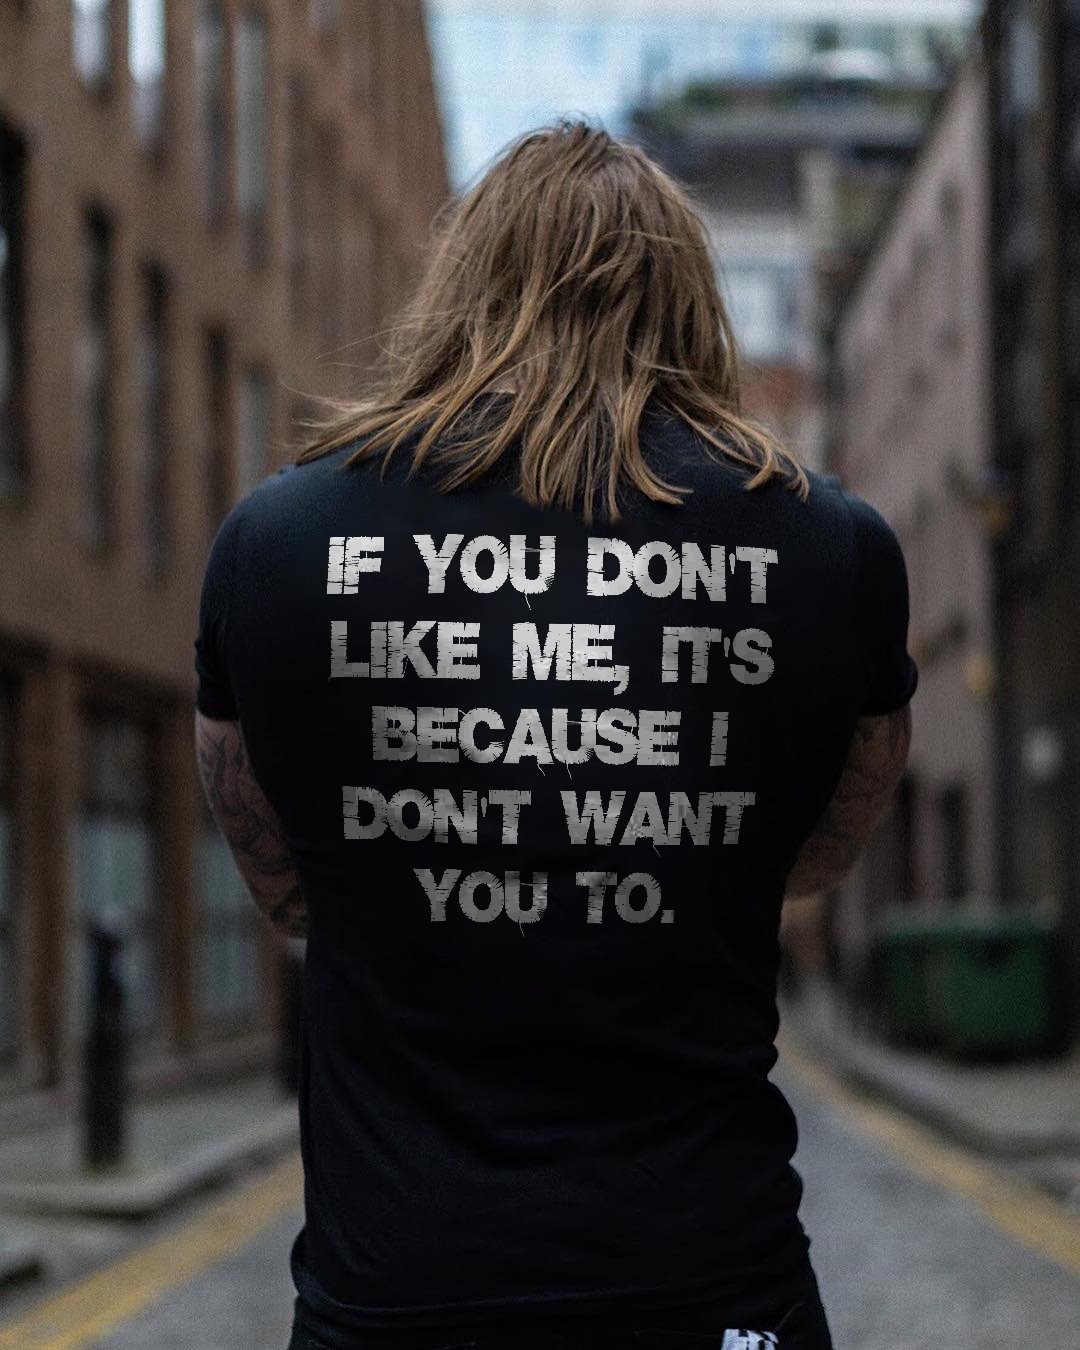 Livereid If You Don't Like Me, It's Because I Don't Want You To Printed T-shirt - Livereid